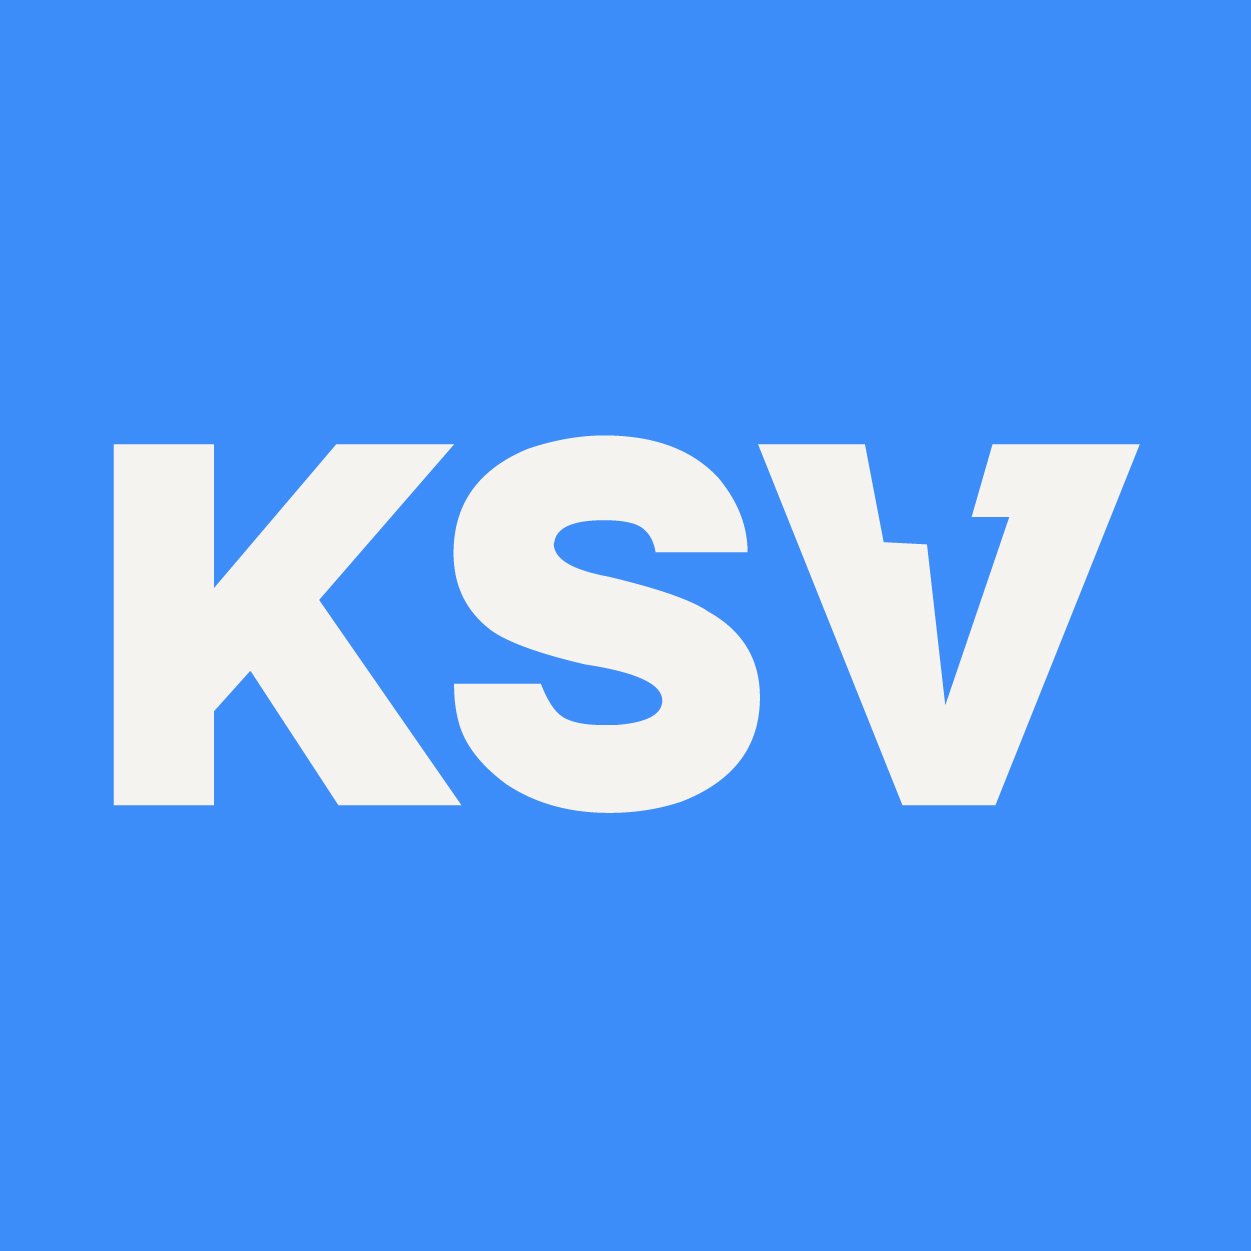 How 2021 Brought a Shift in Perspective - and New Opportunities - to KSV’s Doorstep